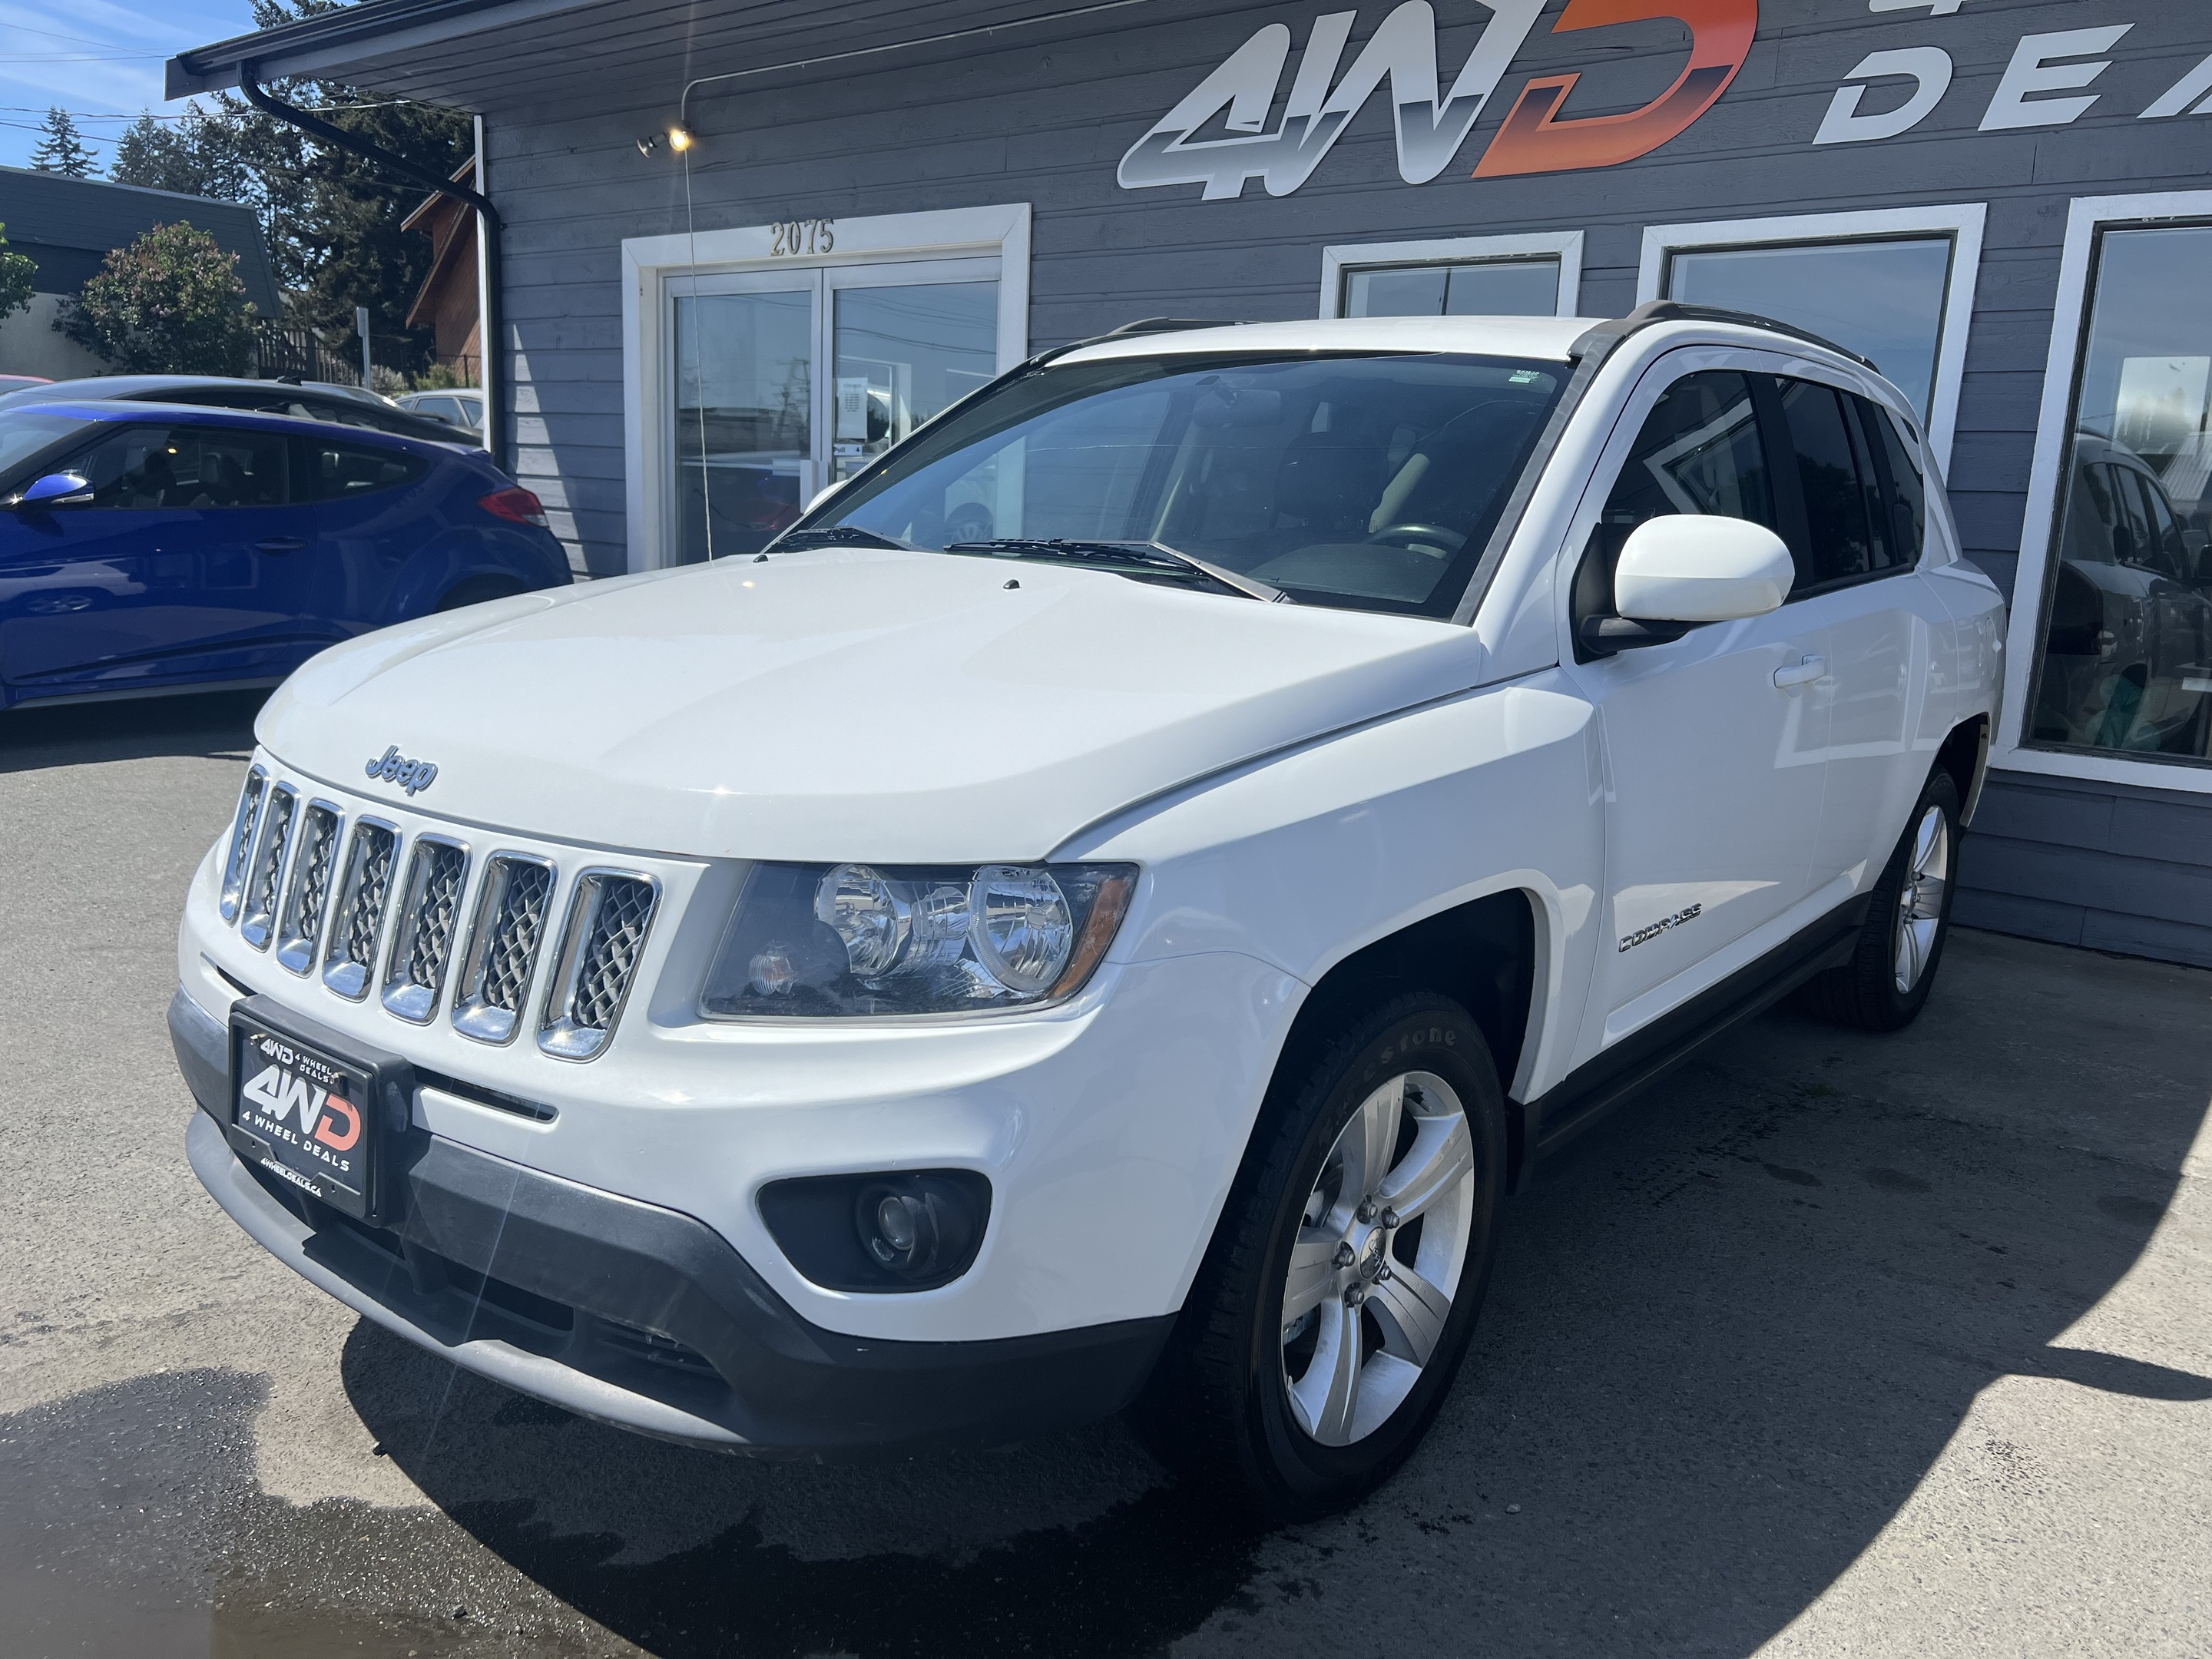 2014 Jeep Compass 4WD 4dr North